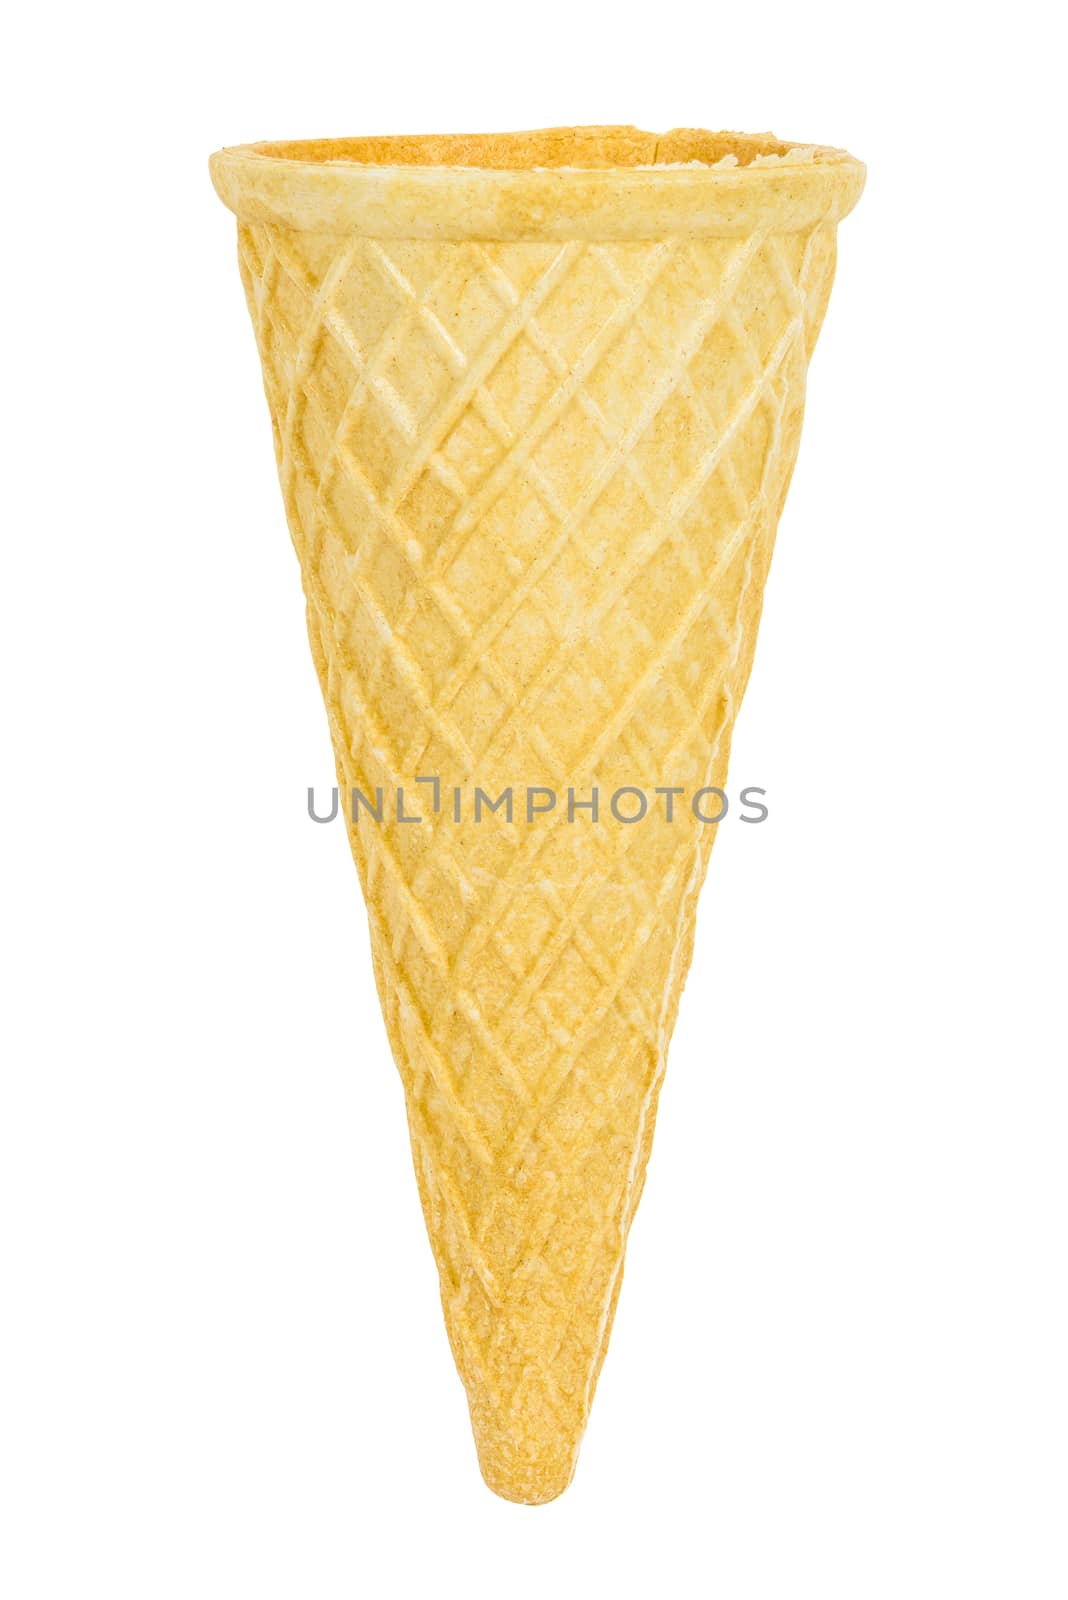 Empty ice cream cone isolated on white background with clipping path